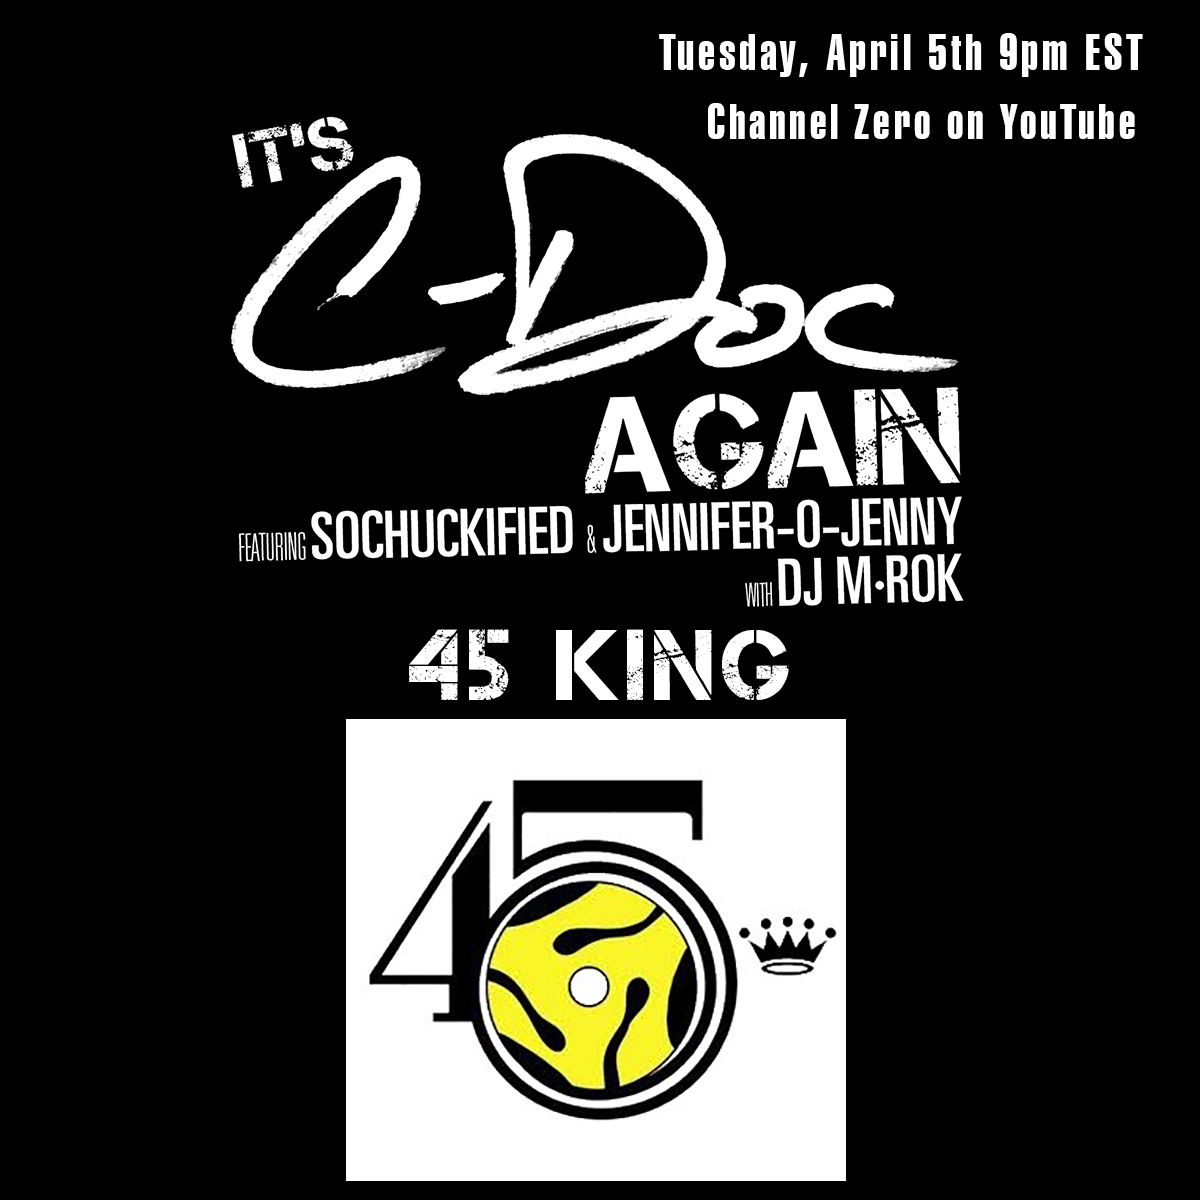 It's C-Doc Again! Join us at 9pm EST on the #ChannelZero #YouTube page. Tonight we welcome @TheReal45King to the show. 👉ow.ly/62nT50IBoU2 #SpitSLAMRecords #hiphop #itscdocagain